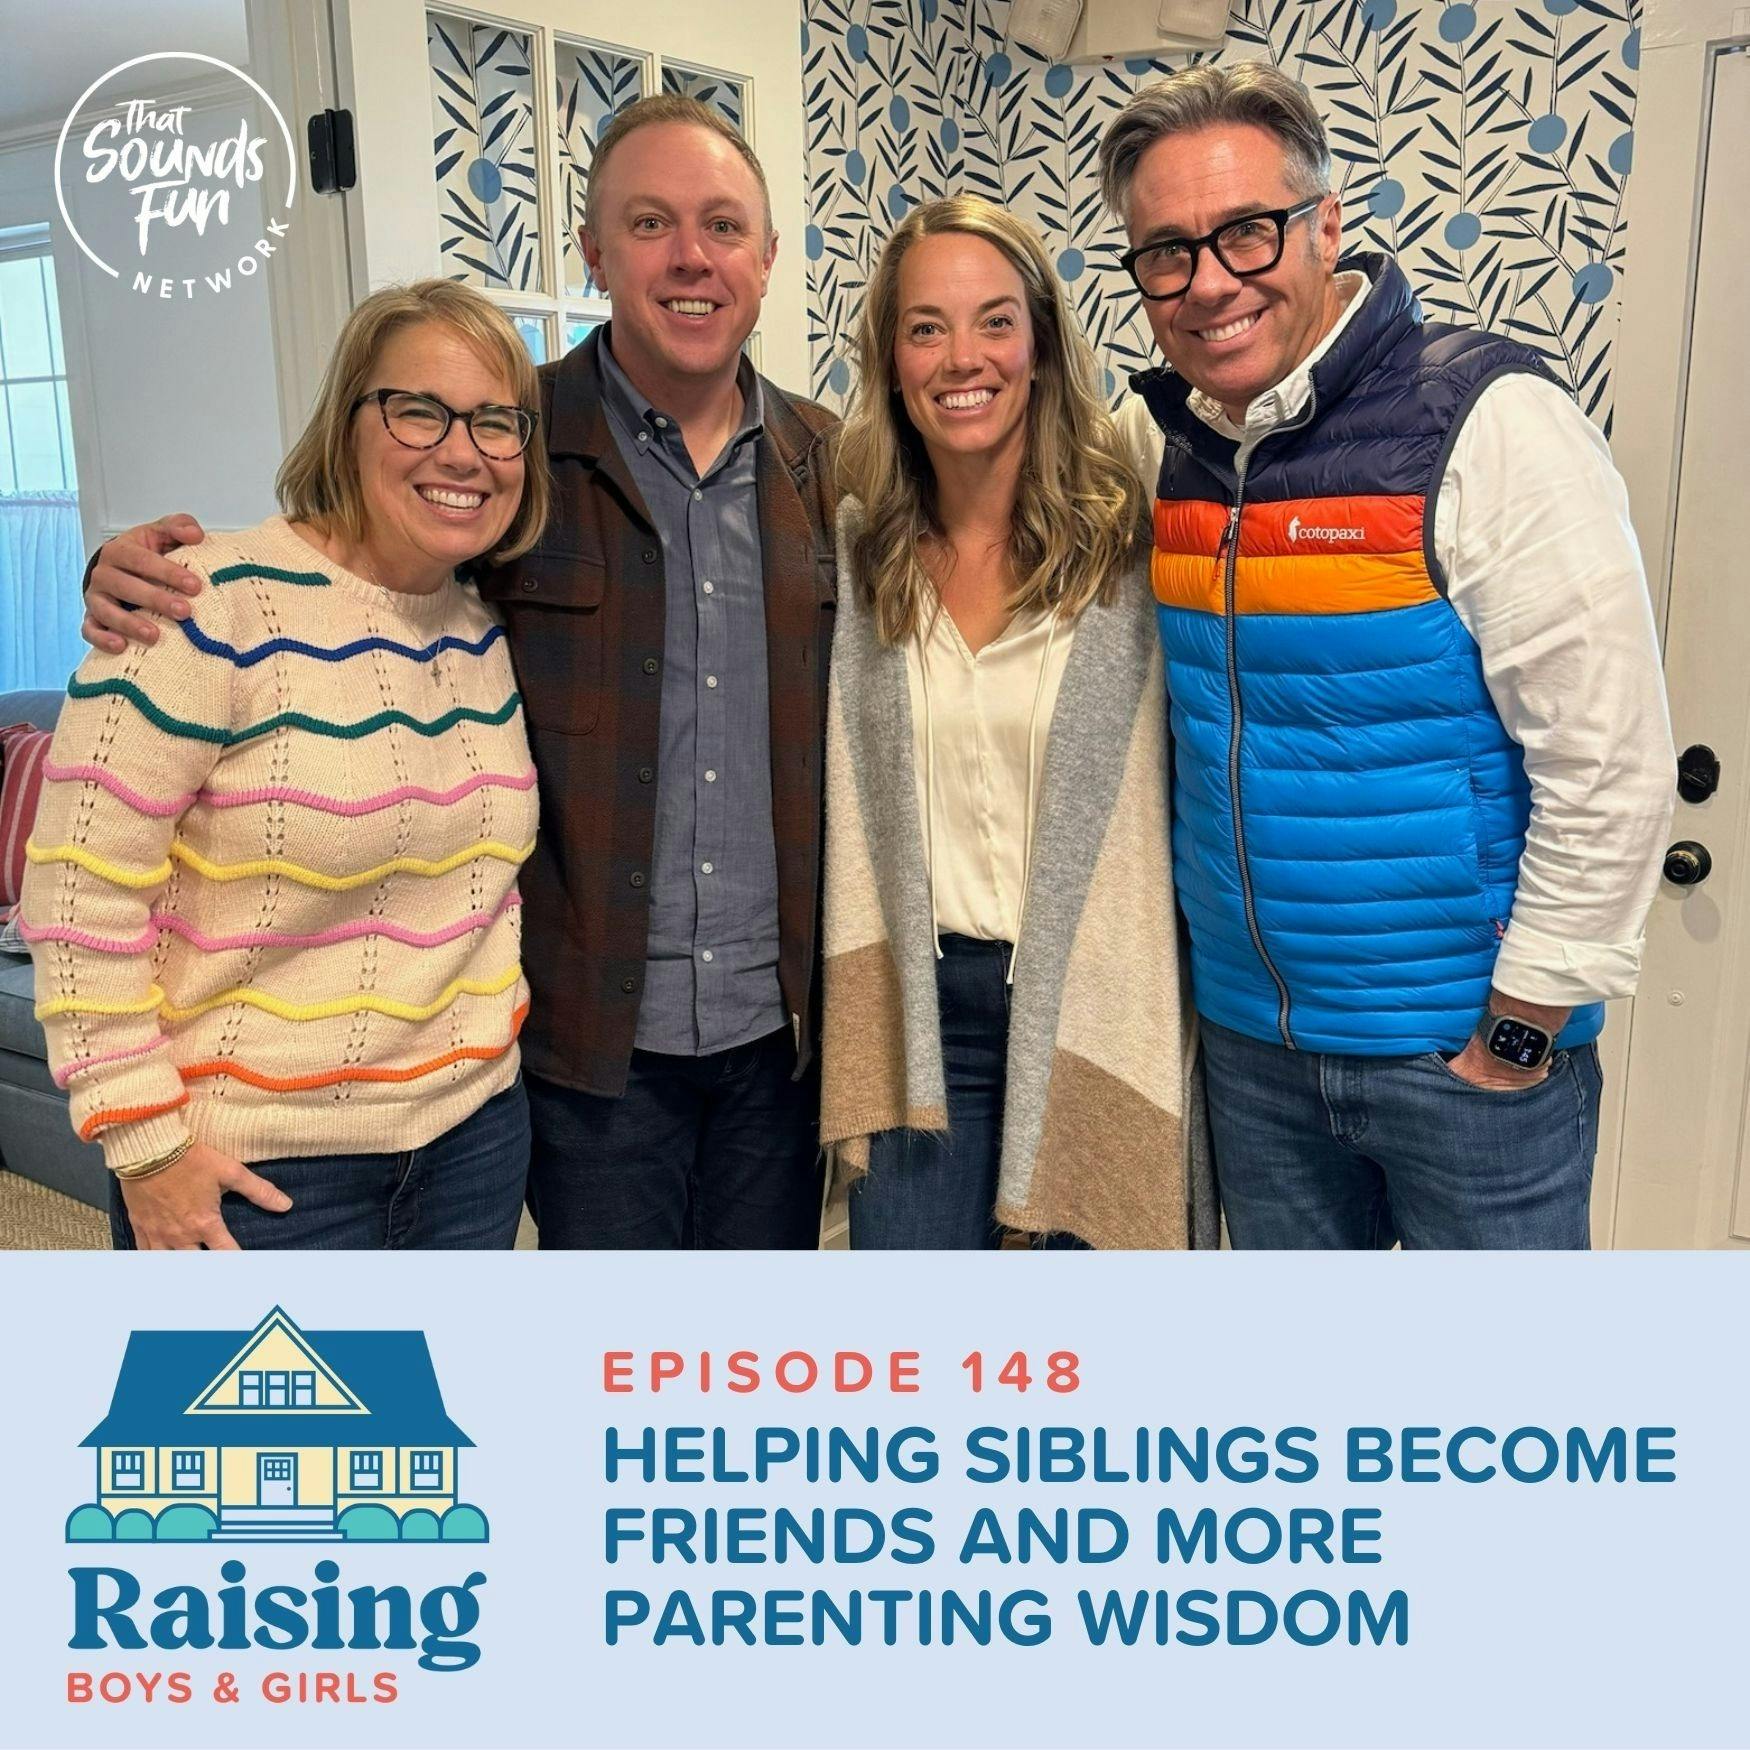 Episode 148: Helping Siblings Become Friends and More Parenting Wisdom